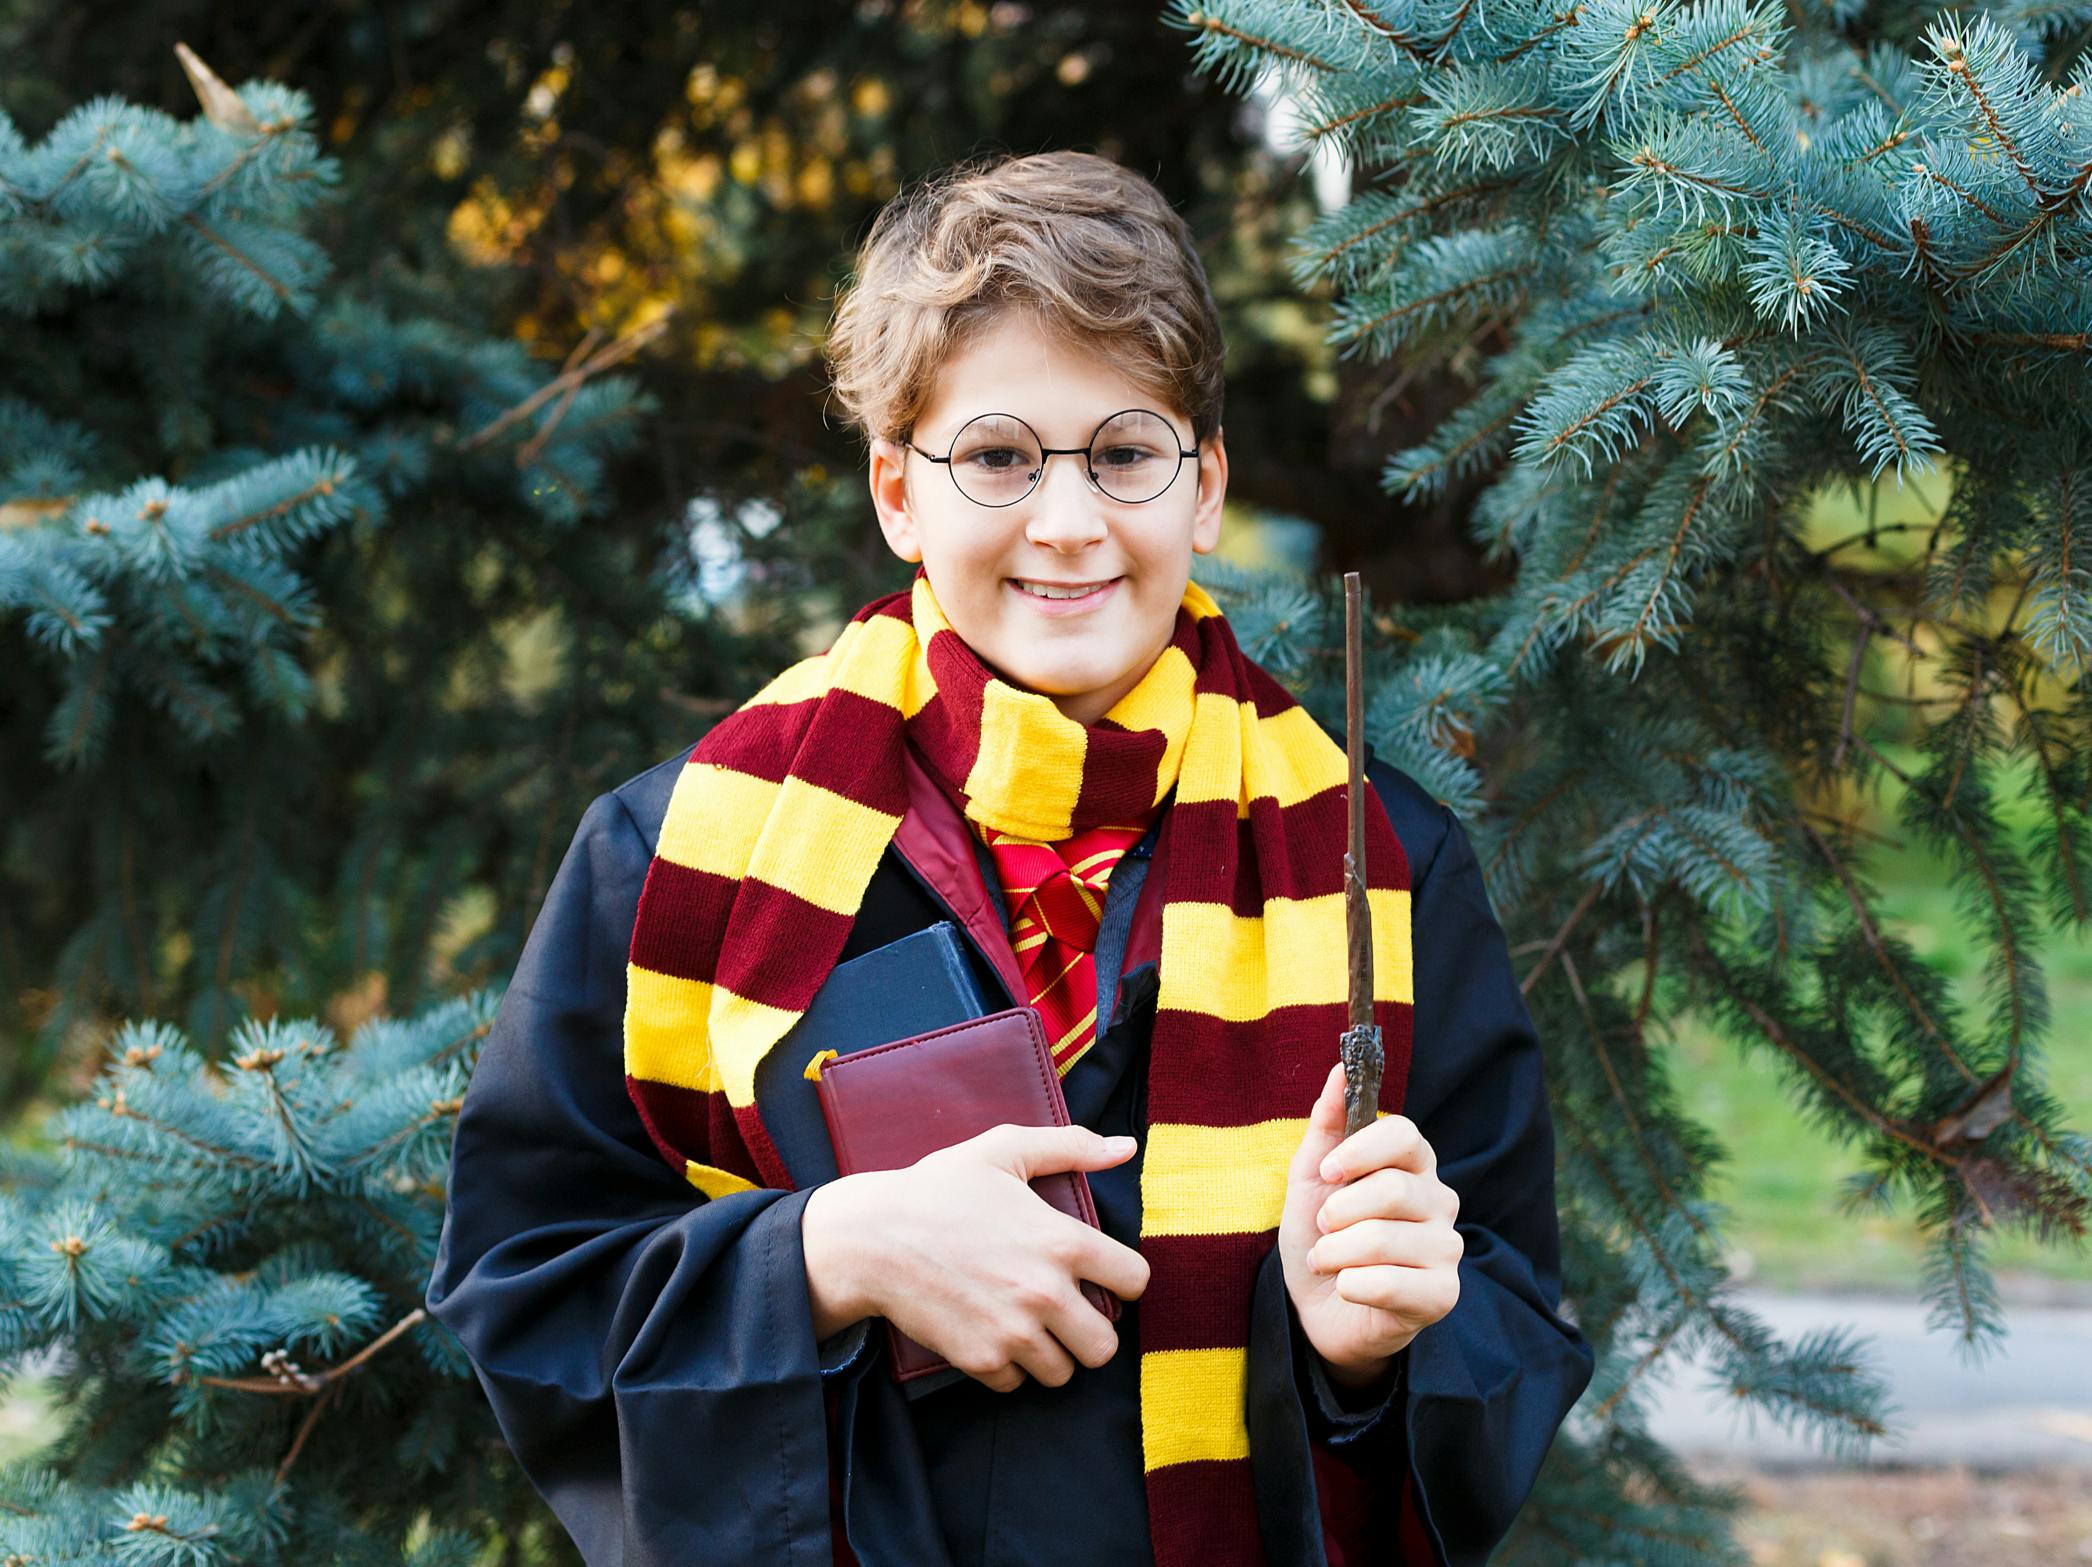 A kid dressed as Harry Potter standing outside and holding a wand and books.